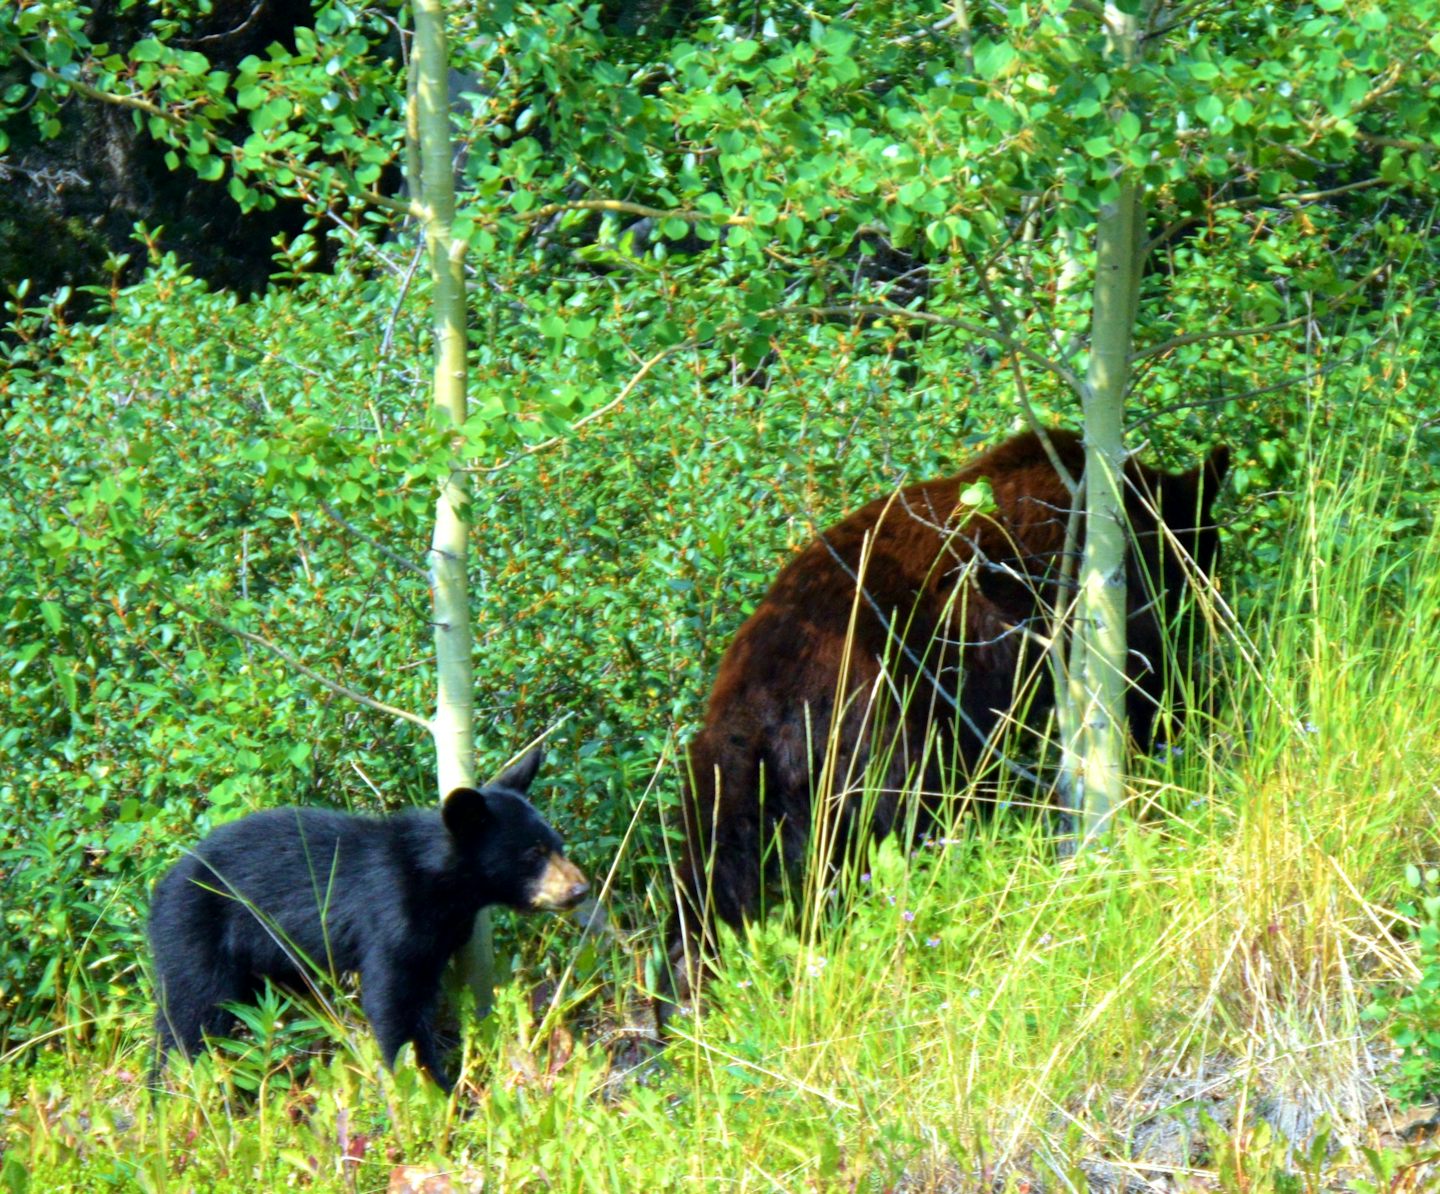 Bears on the Yukon Experience out of Skagway.